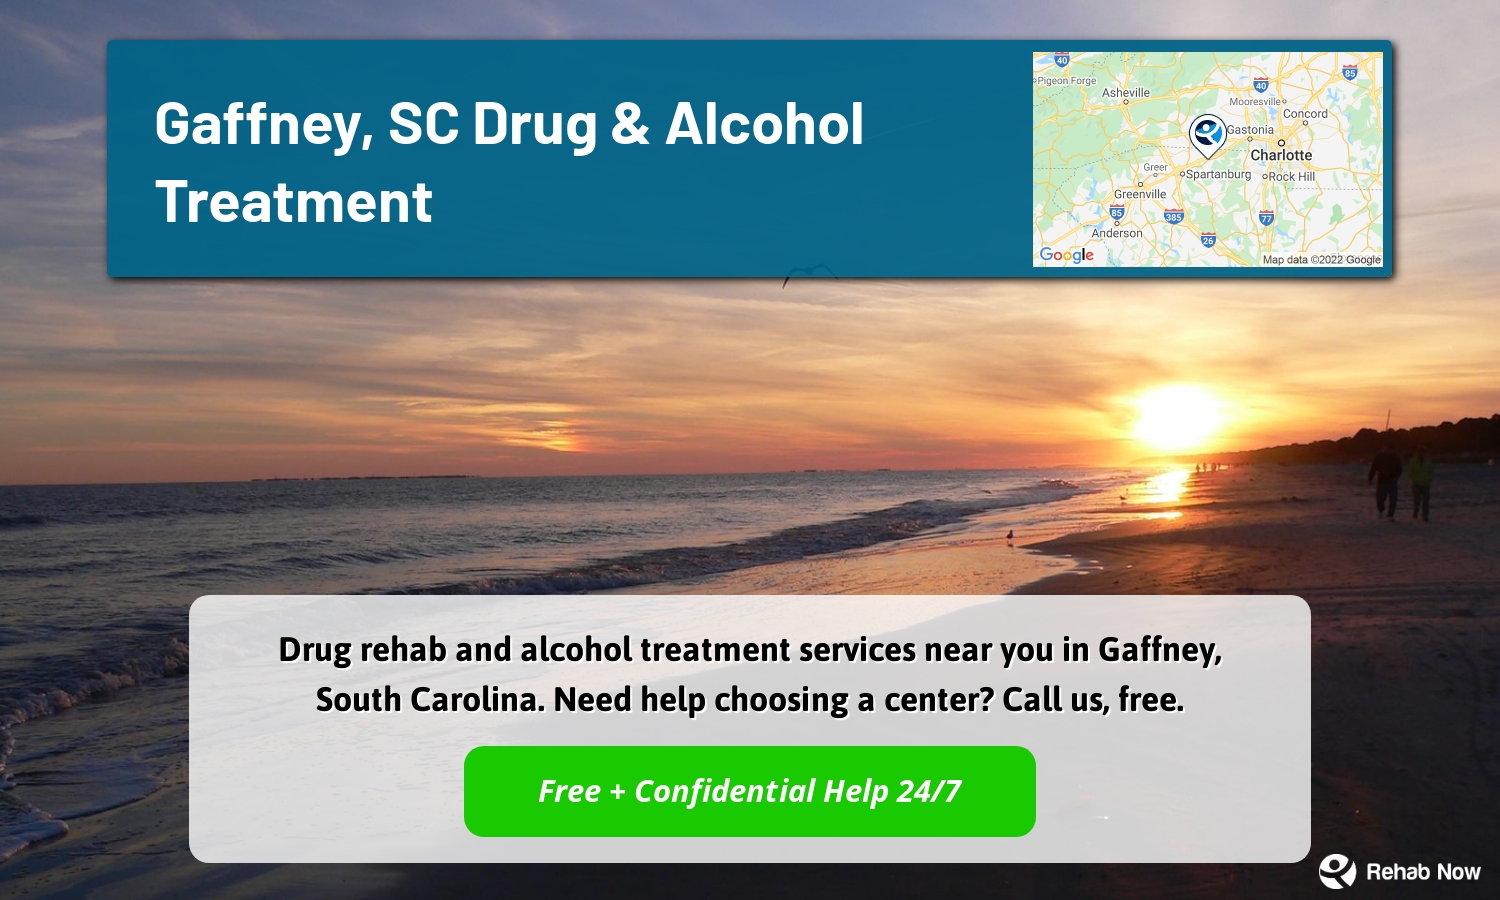 Drug rehab and alcohol treatment services near you in Gaffney, South Carolina. Need help choosing a center? Call us, free.